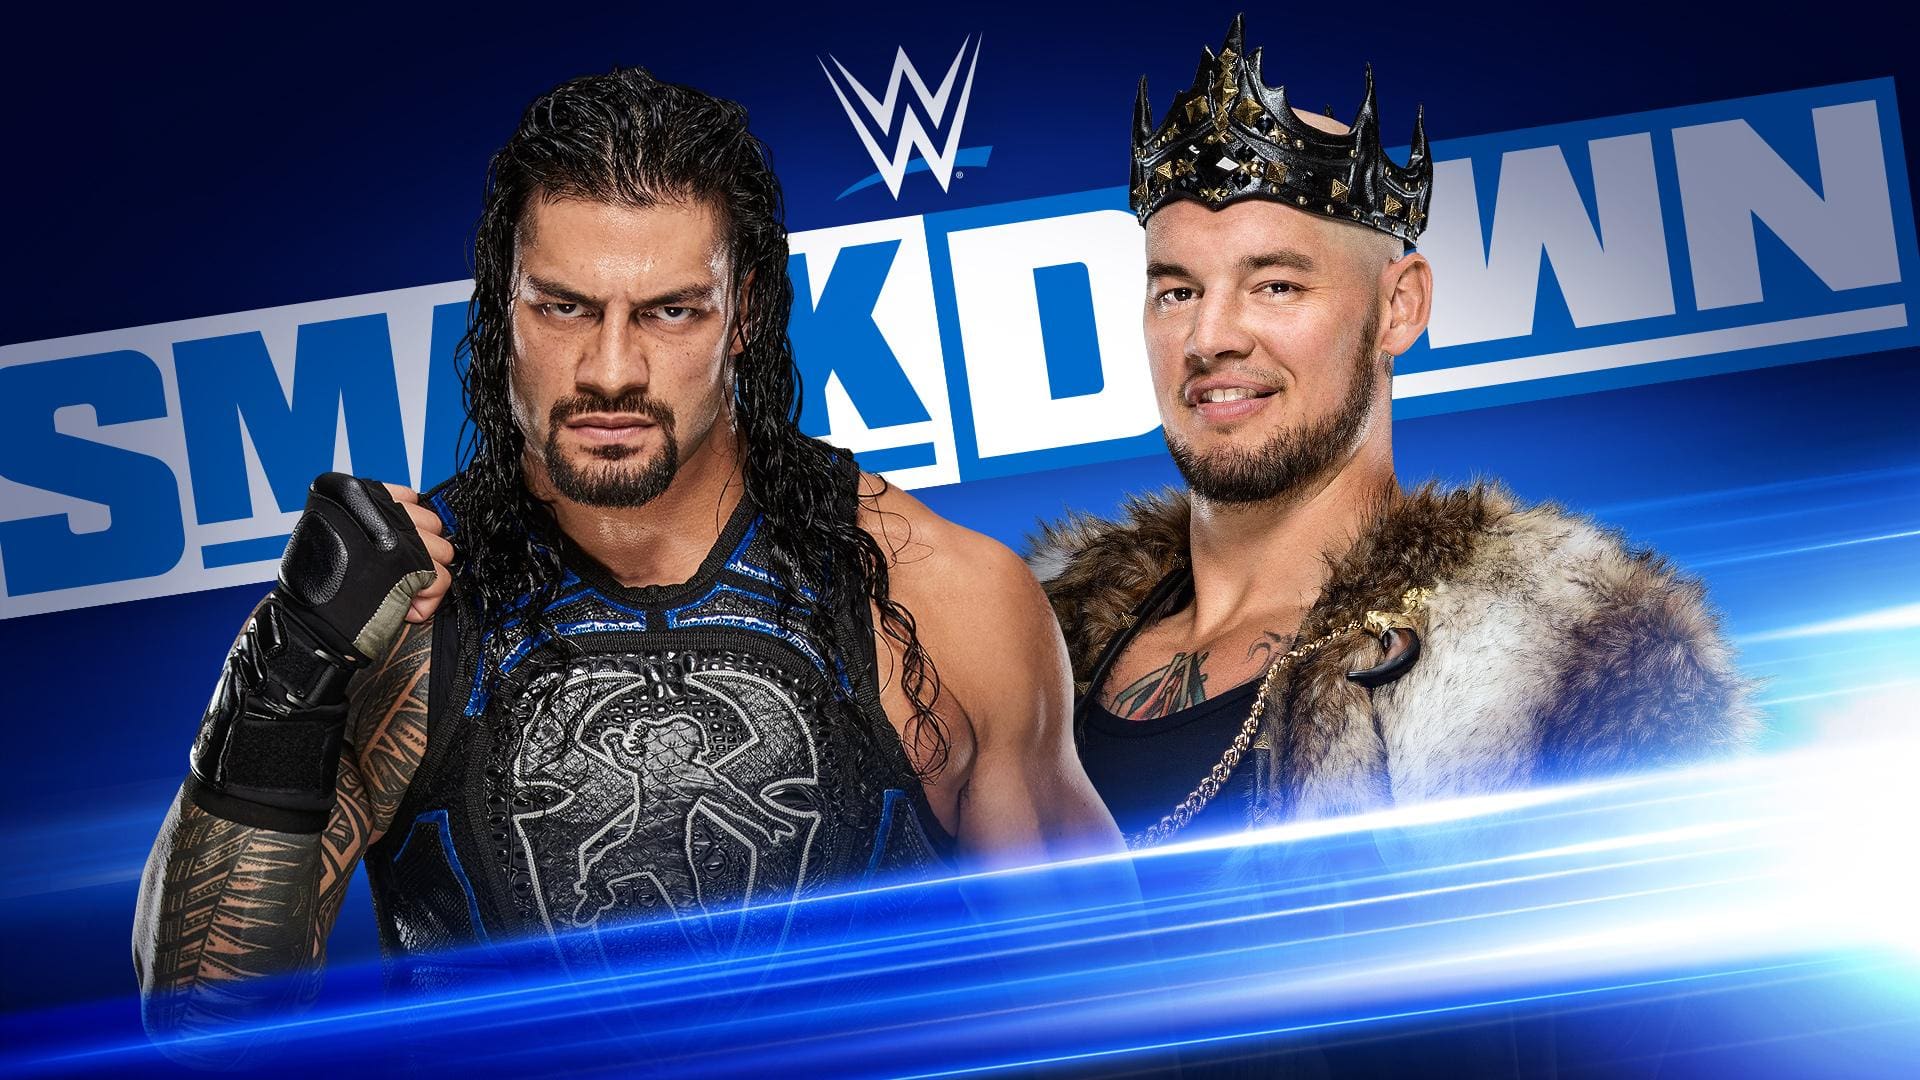 Confirmed Matches & Segments For WWE Friday Night SmackDown